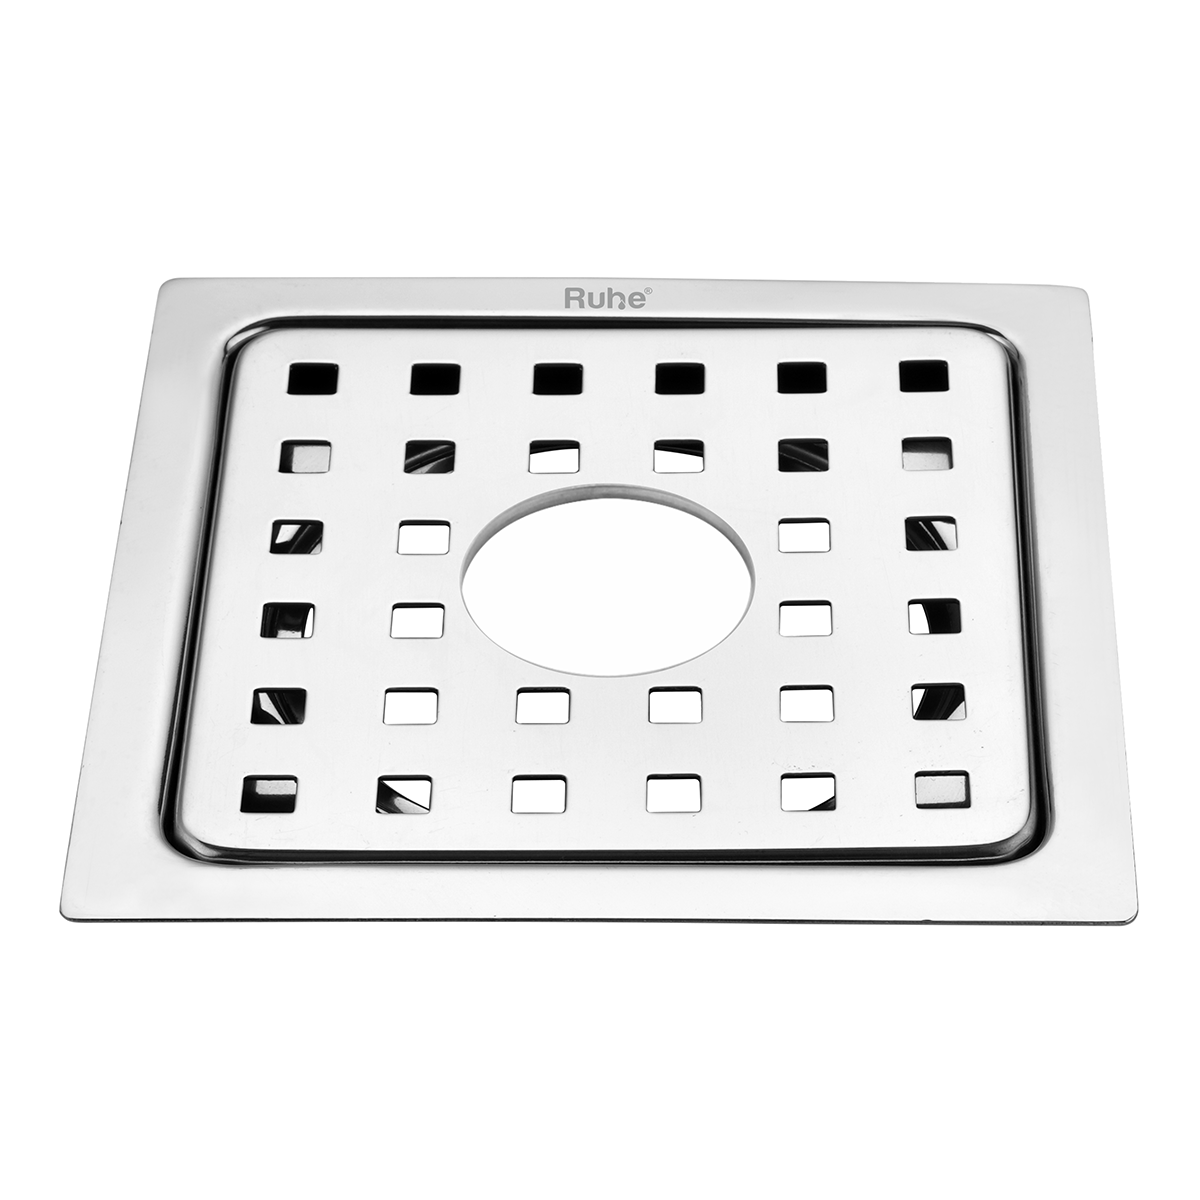 Check Floor Drain Square Flat Cut (5 x 5 Inches) with Hole